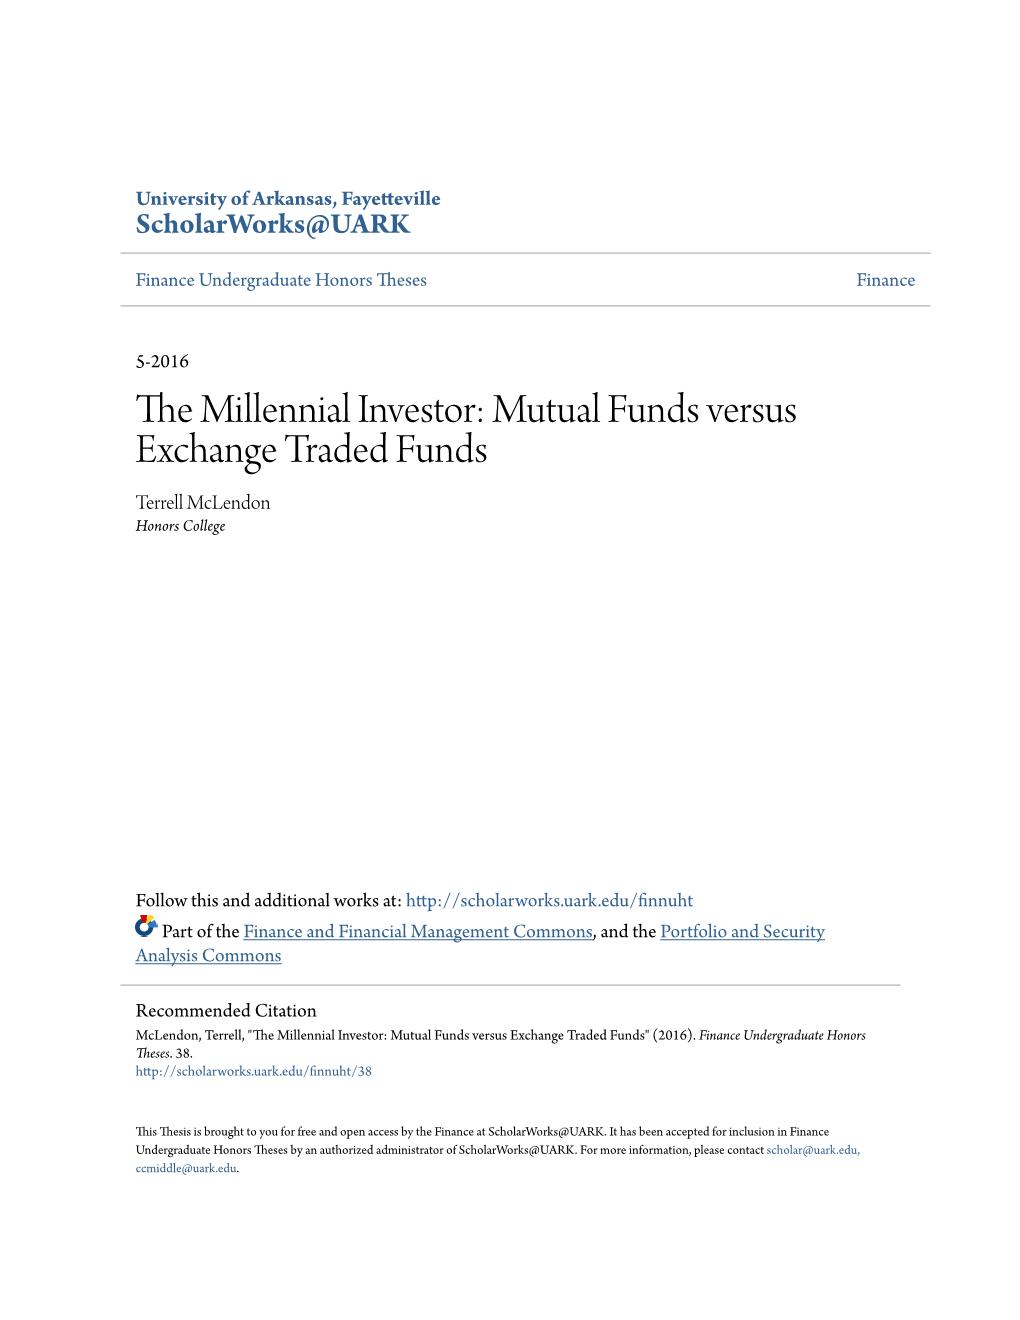 Mutual Funds Versus Exchange Traded Funds Terrell Mclendon Honors College